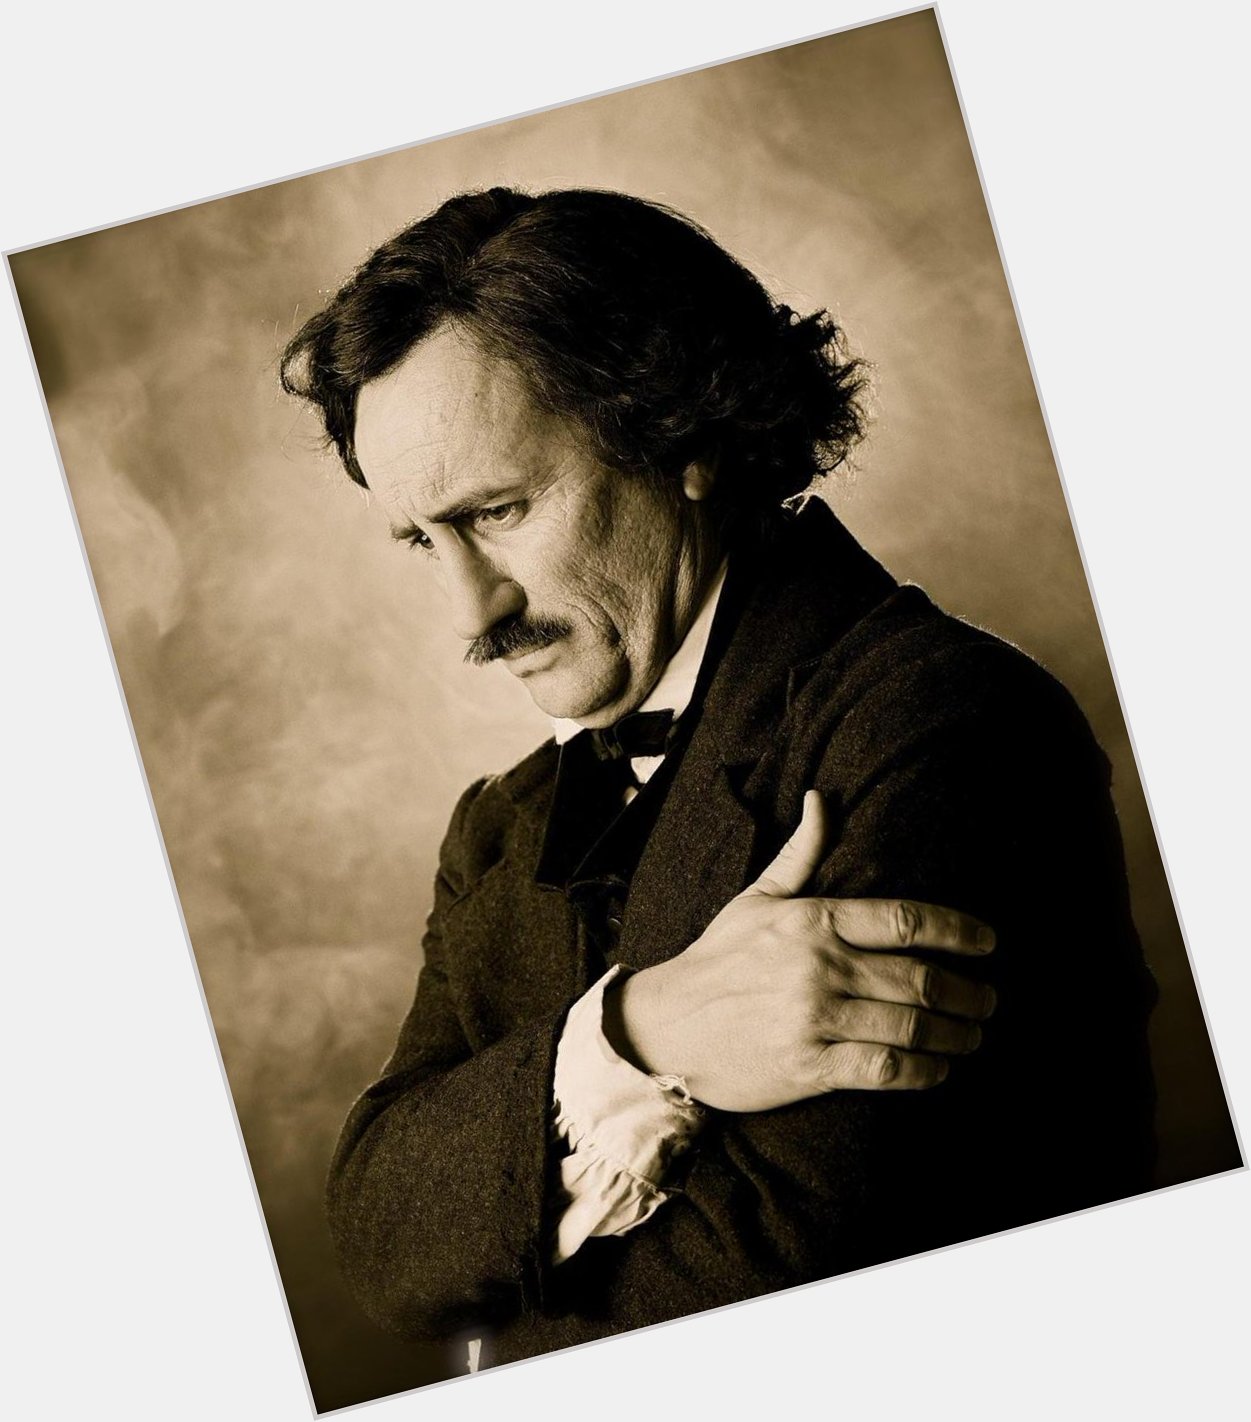 Happy Birthday to Jeffrey Combs! Many happy returns of the day!

Photo of Combs as Edgar Allan Poe by Ward Boult. 